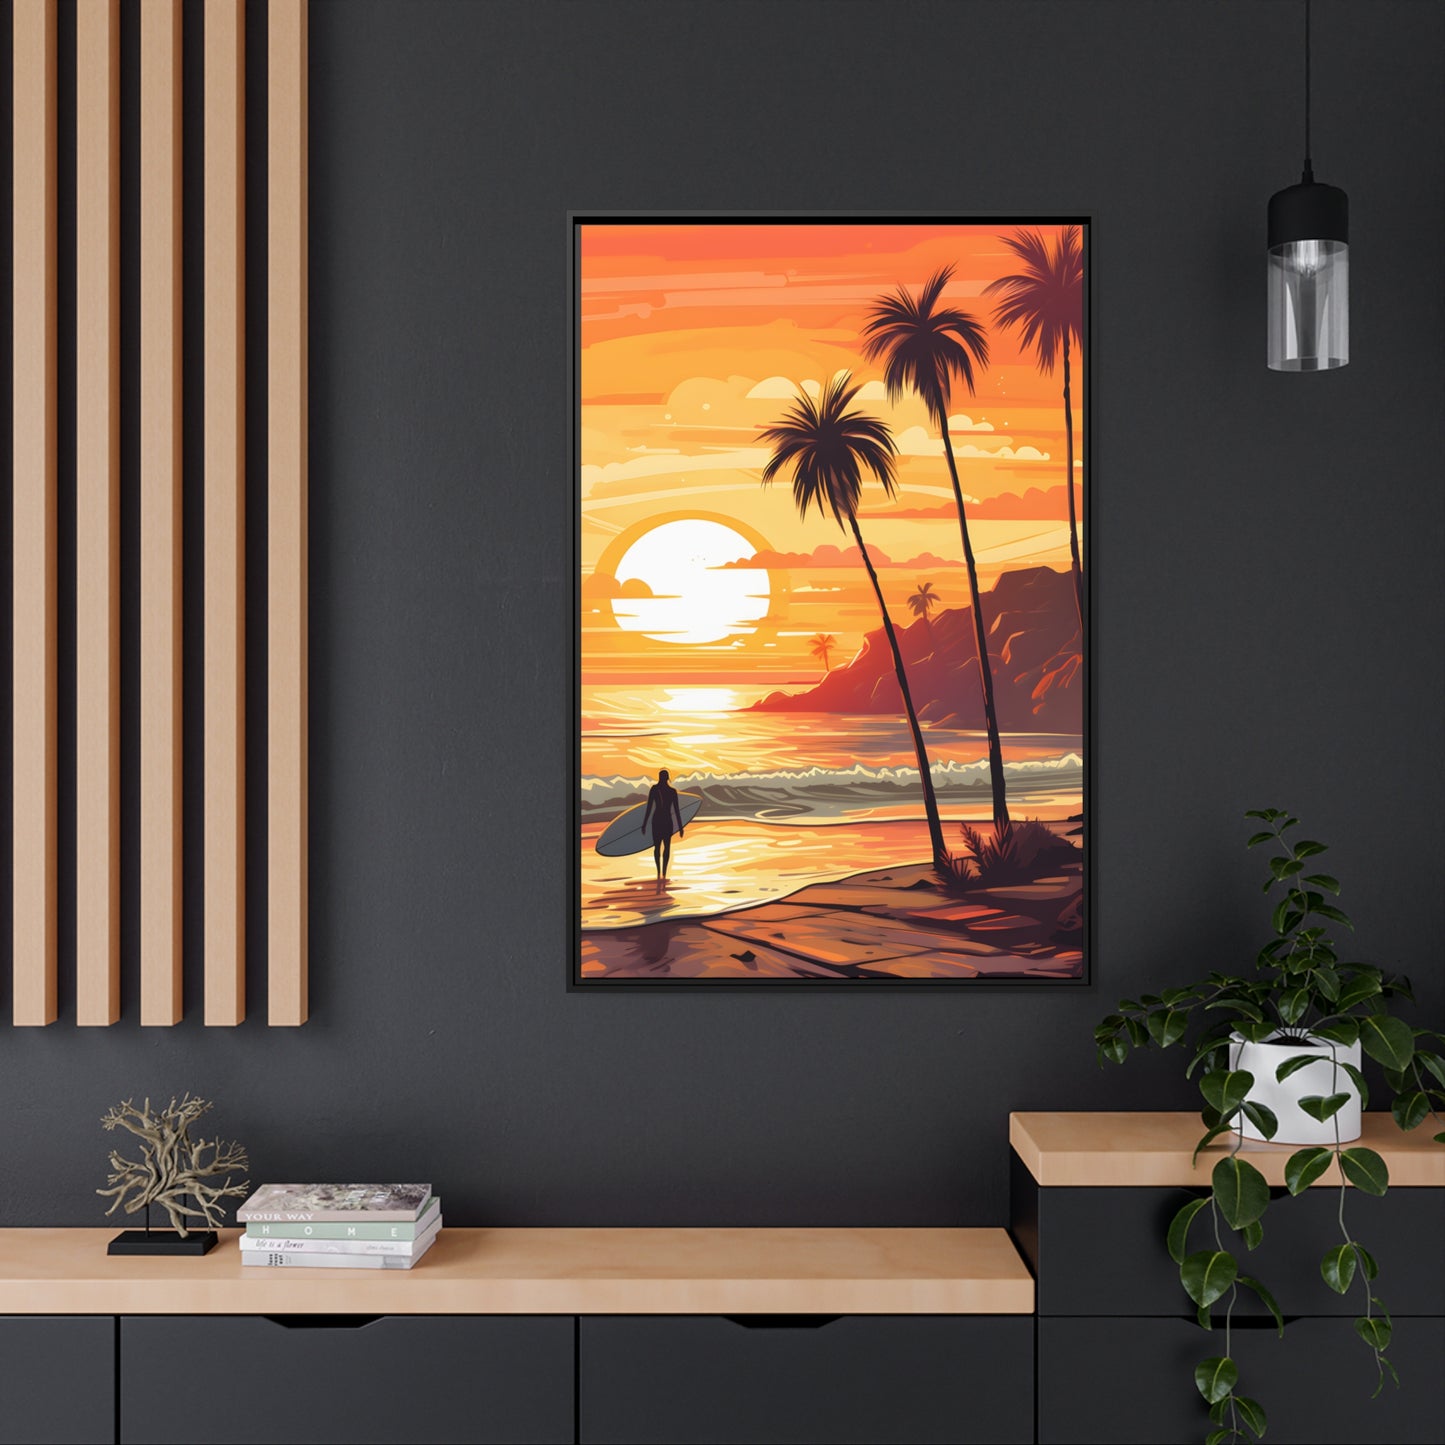 Framed Canvas Artwork Beach Ocean Surfing Warm Sunset Art Surfer Walking Up The Beach Holding Surfboard Palm Tree Silhouettes Sets The Tone Floating Frame Canvas Artwork